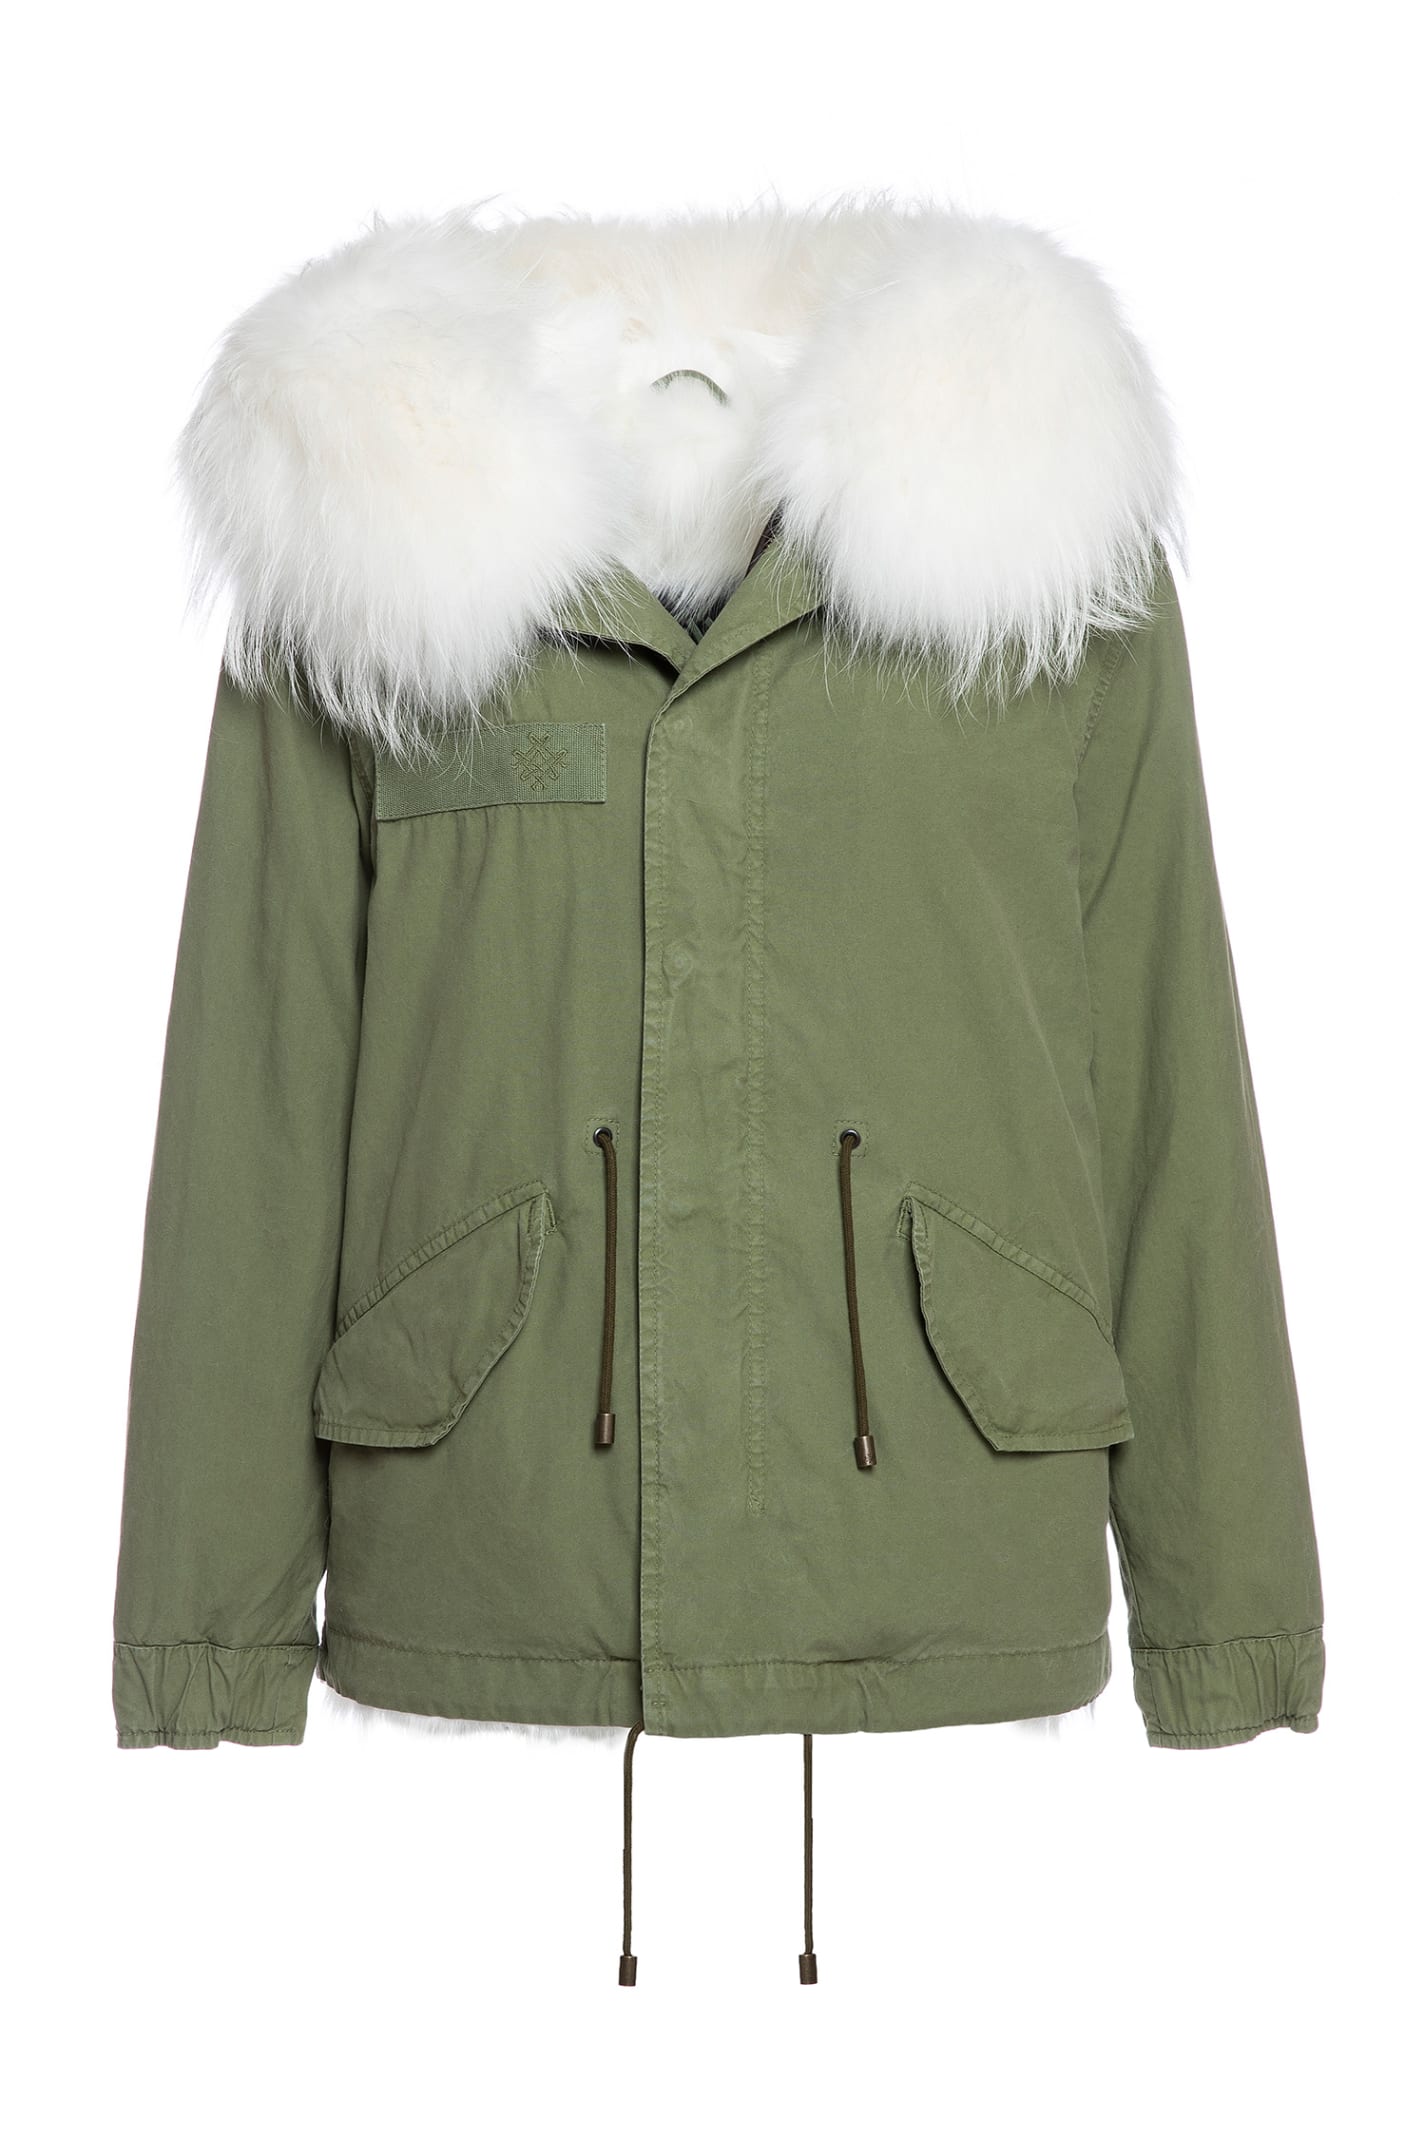 Mr & Mrs Italy Exclusive Fw20 Icon Parka: Army Cotton Canvas Mini Parka With Fox Fur Lining